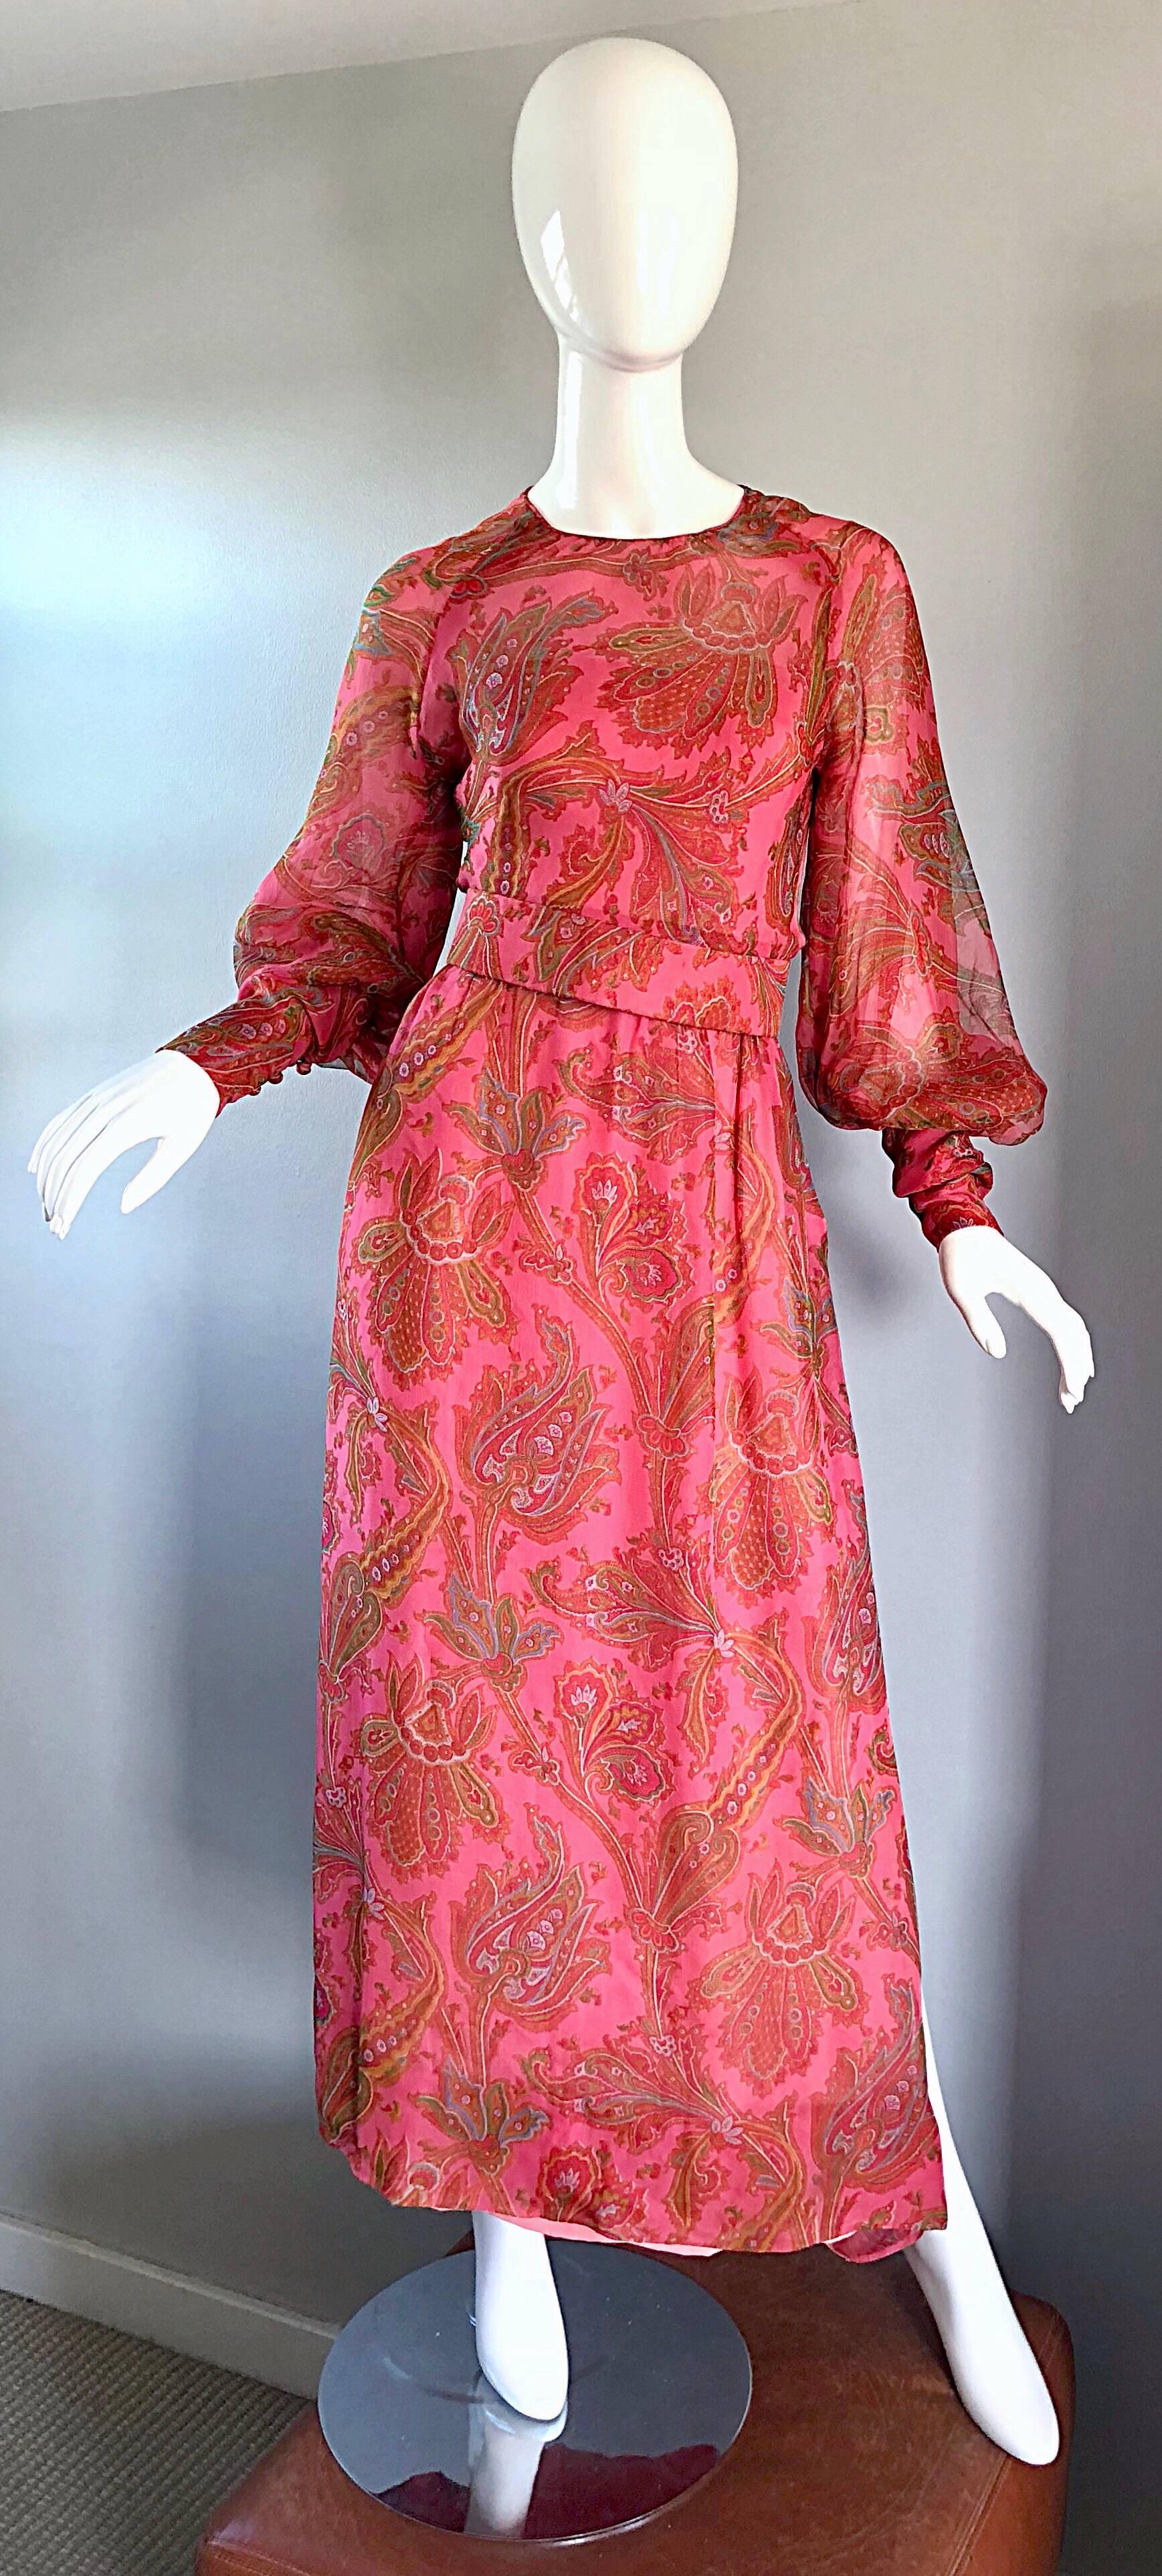 Gorgeous early 70s ADELE SIMPSON silk chiffon pink paisley gown! Features a vibrant paisley print in pink, green, orange, blue and yellow. Fitted bodice, with a slightly full skirt. Slit up the left leg reveals just the right amount of skin. Full